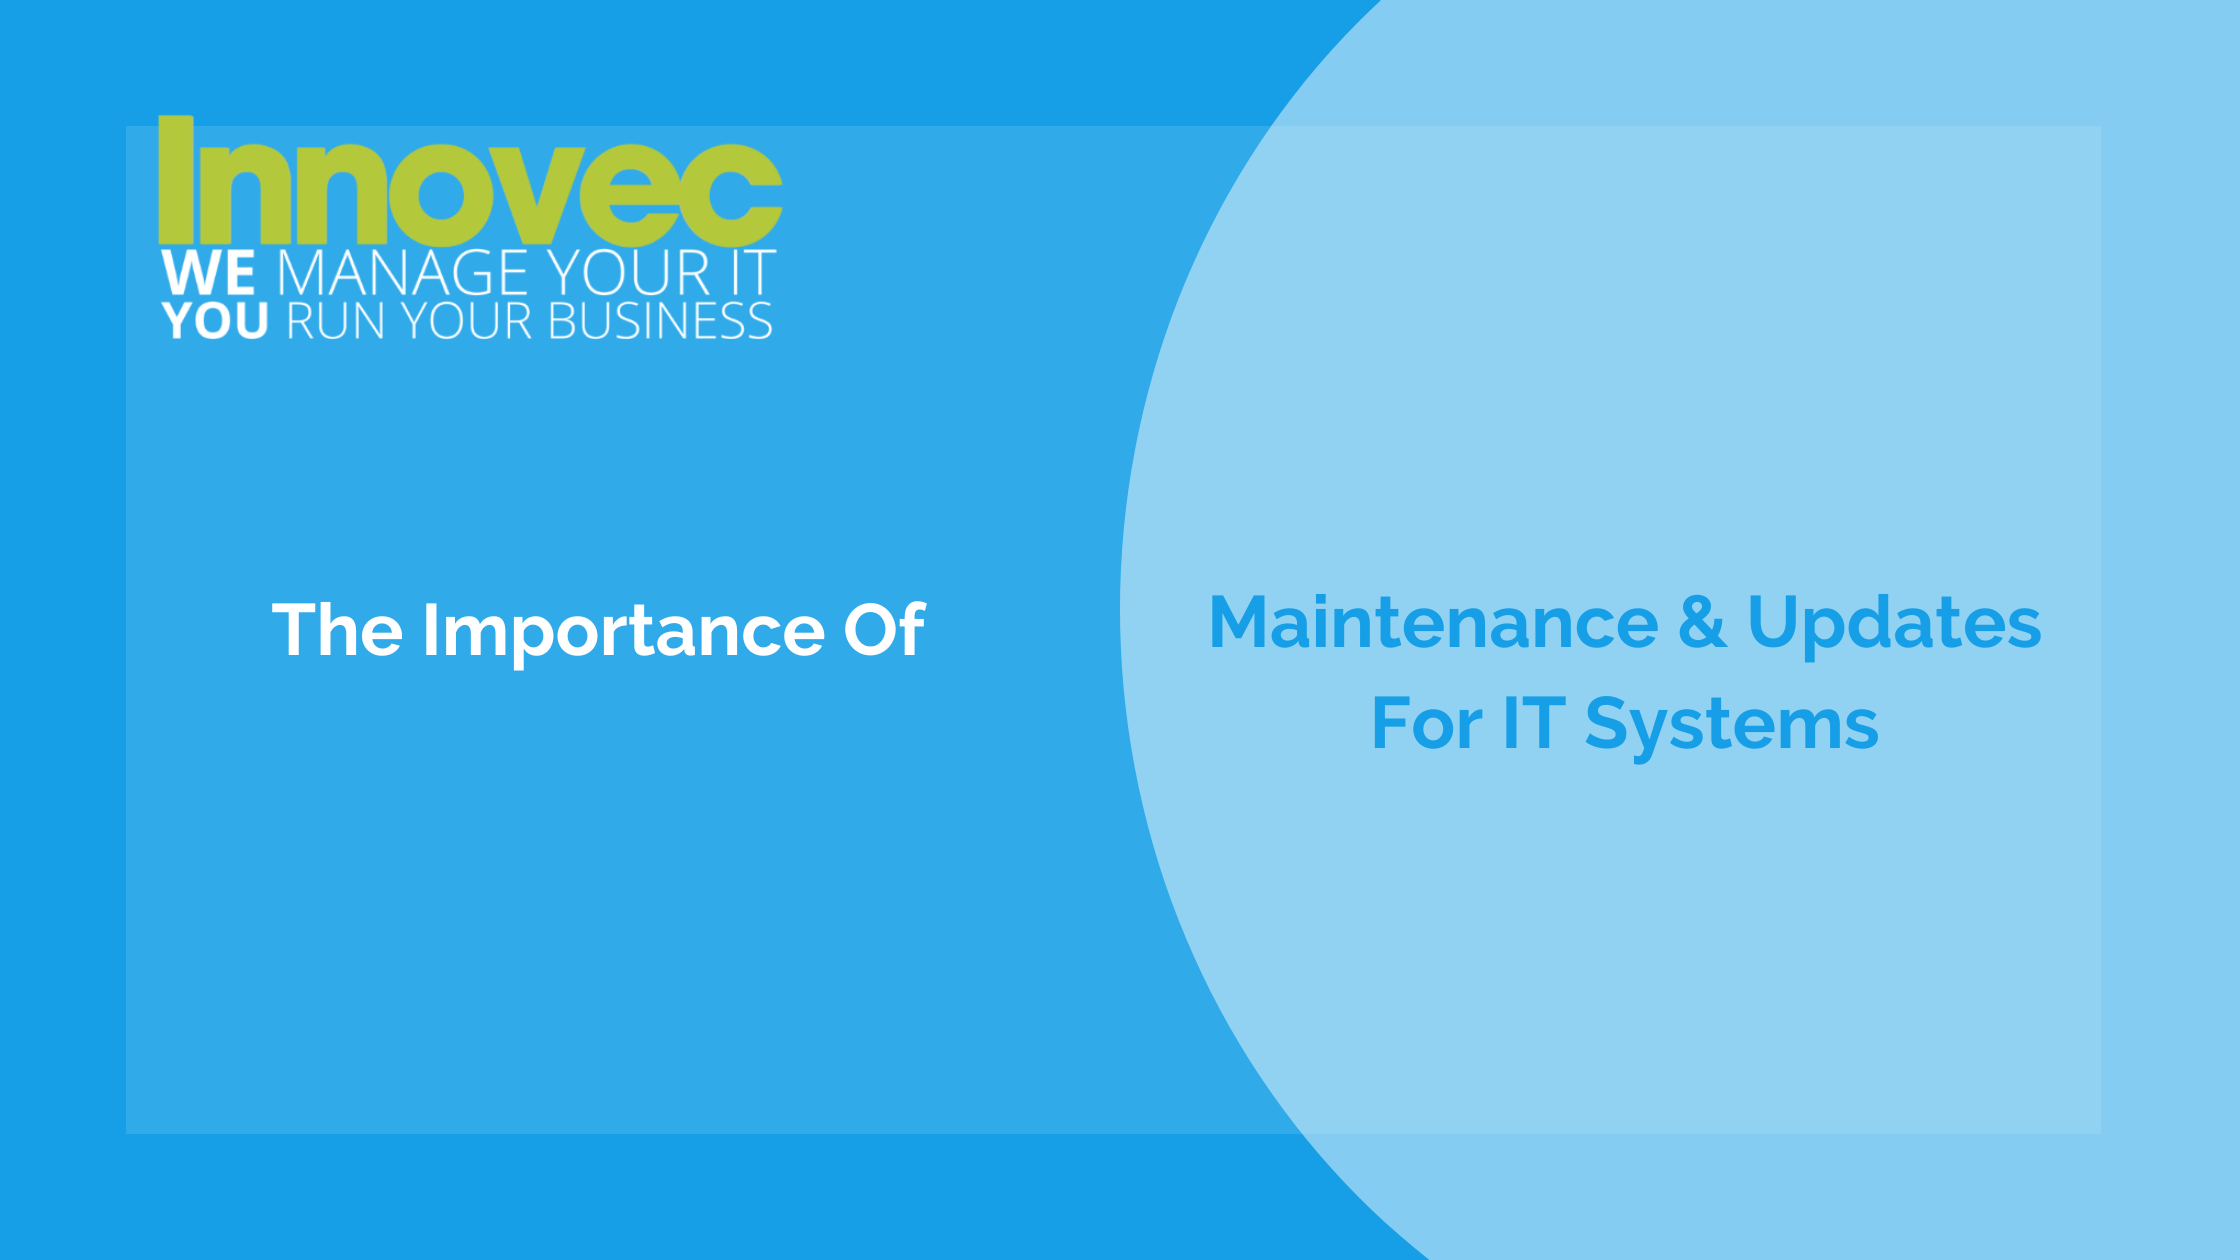 Regular Maintenance & Updates For IT Systems